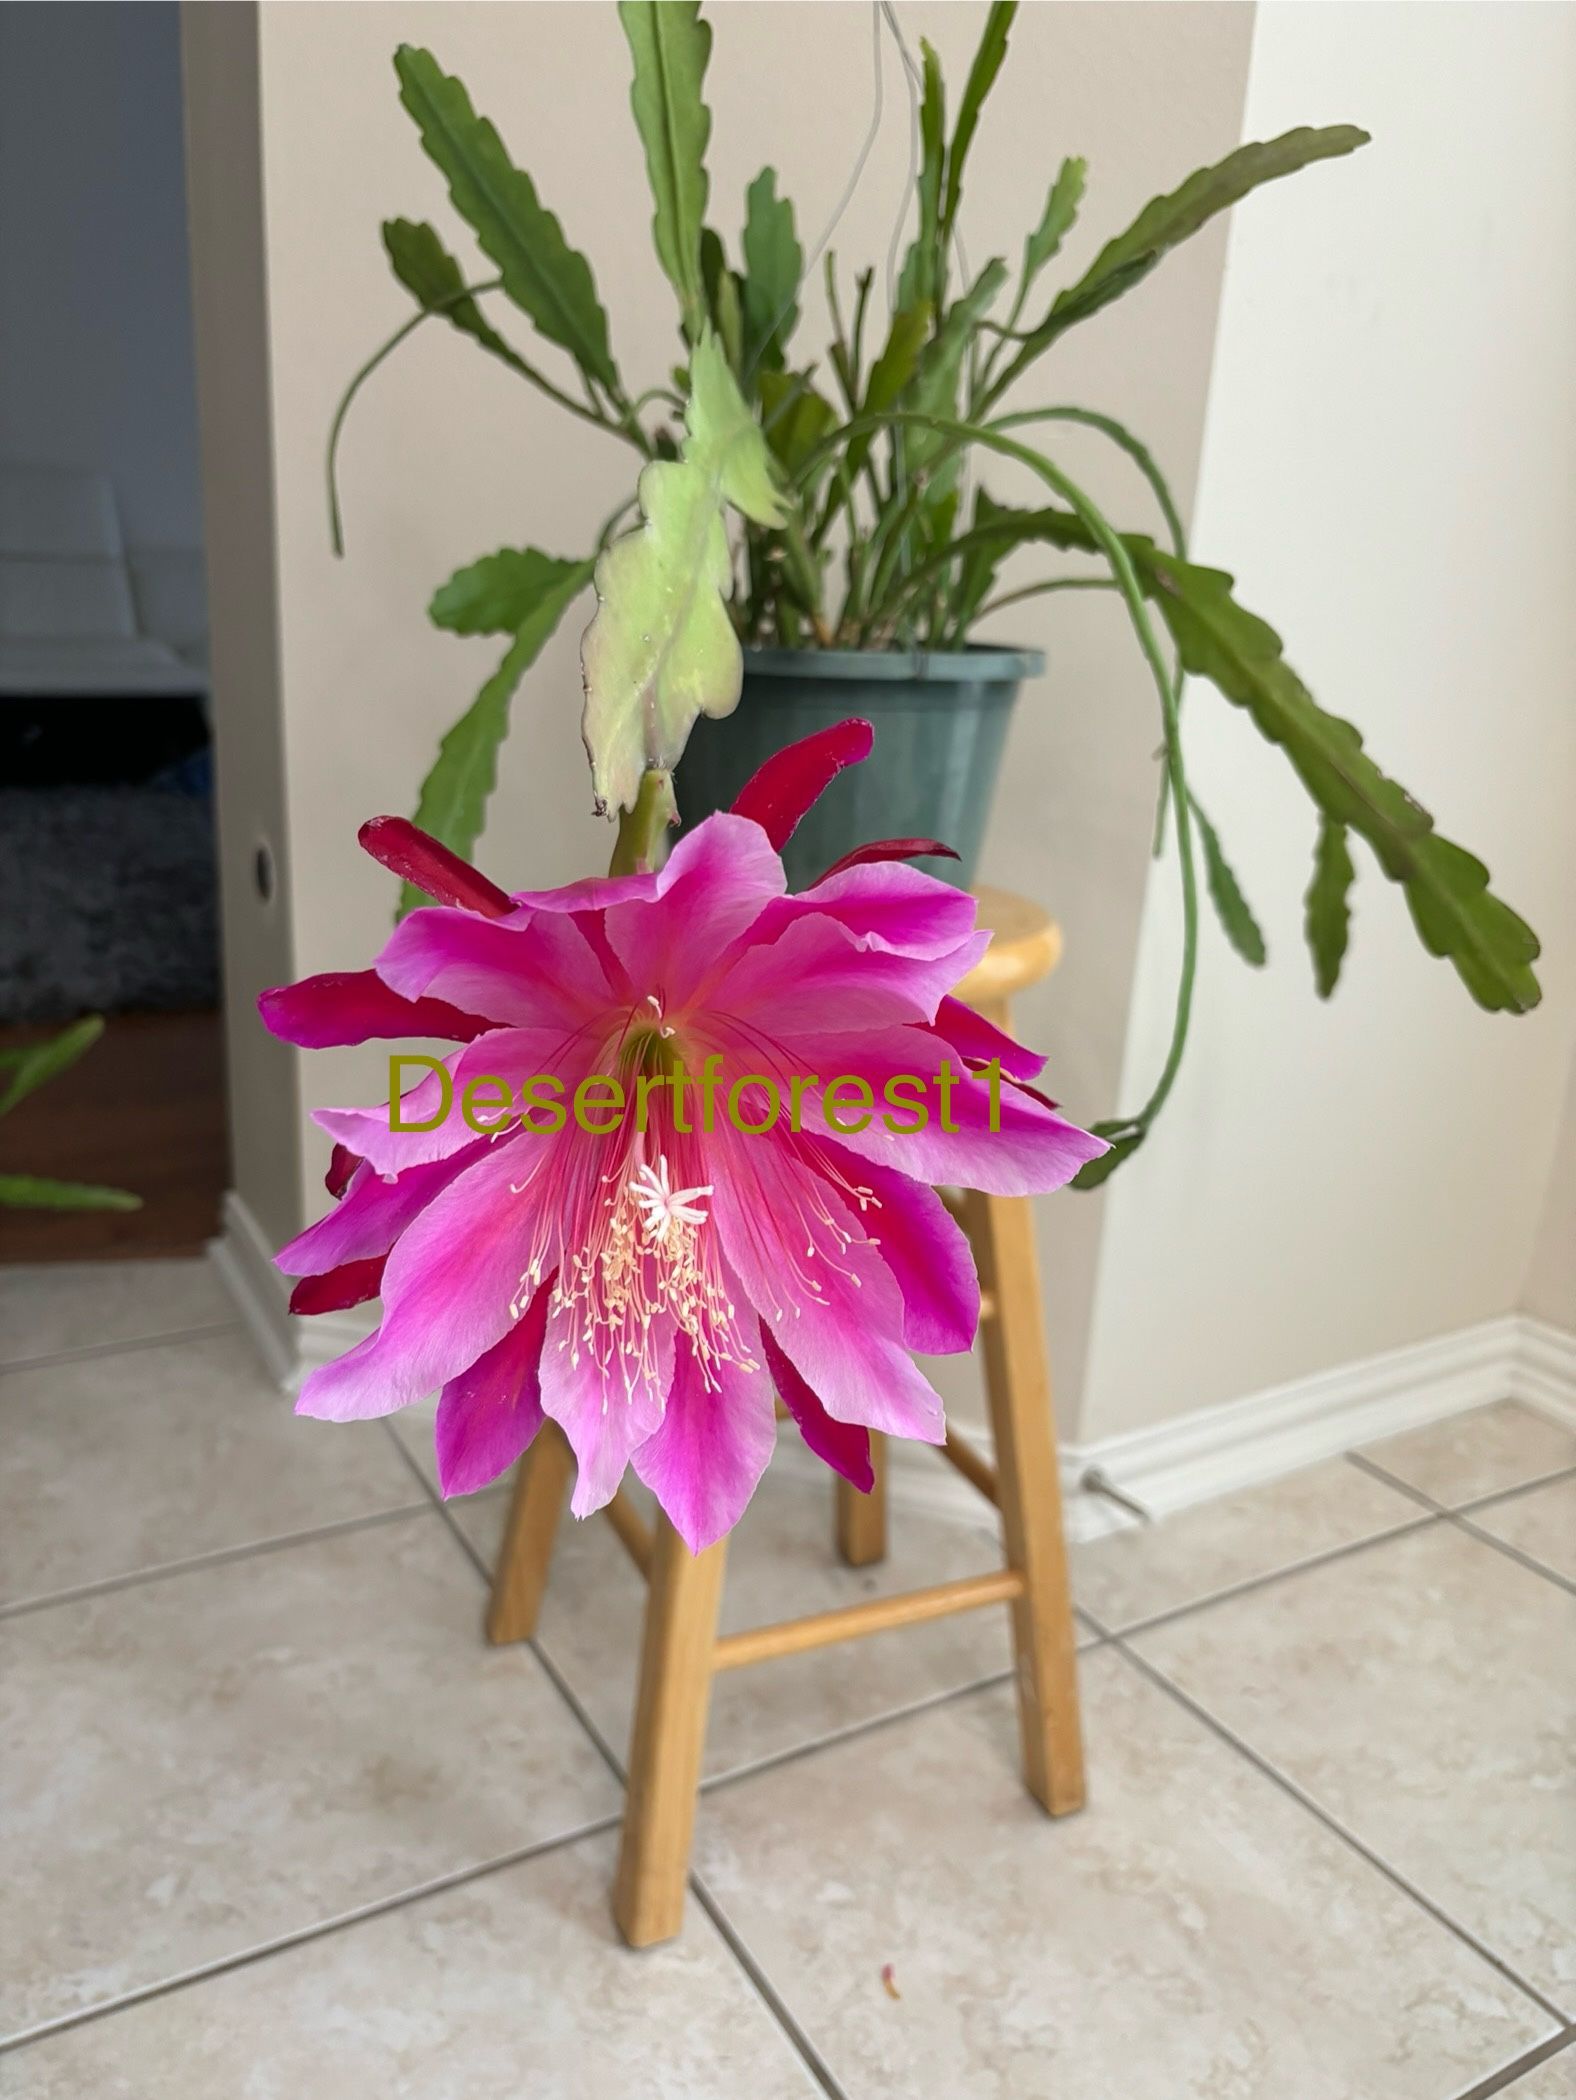 Giant Two Color Epiphyllum!  10” Basket / Hoa Quynh Tim’ / Chid Cactus